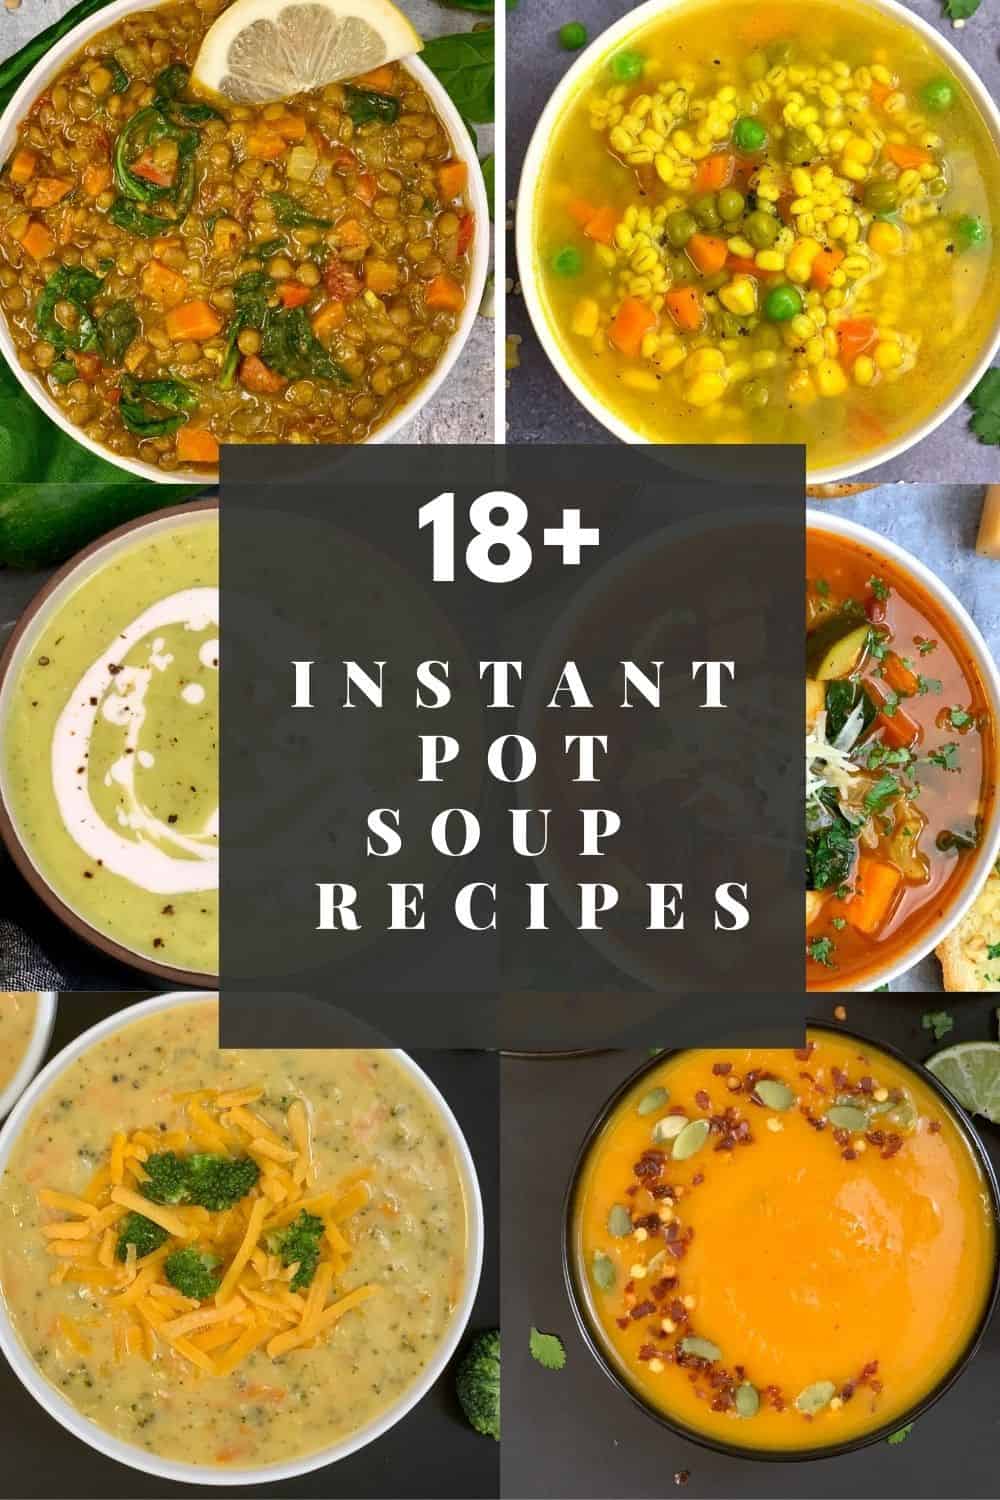 instant pot pressure cooker vegetarian and vegan soup recipes for winter and fall